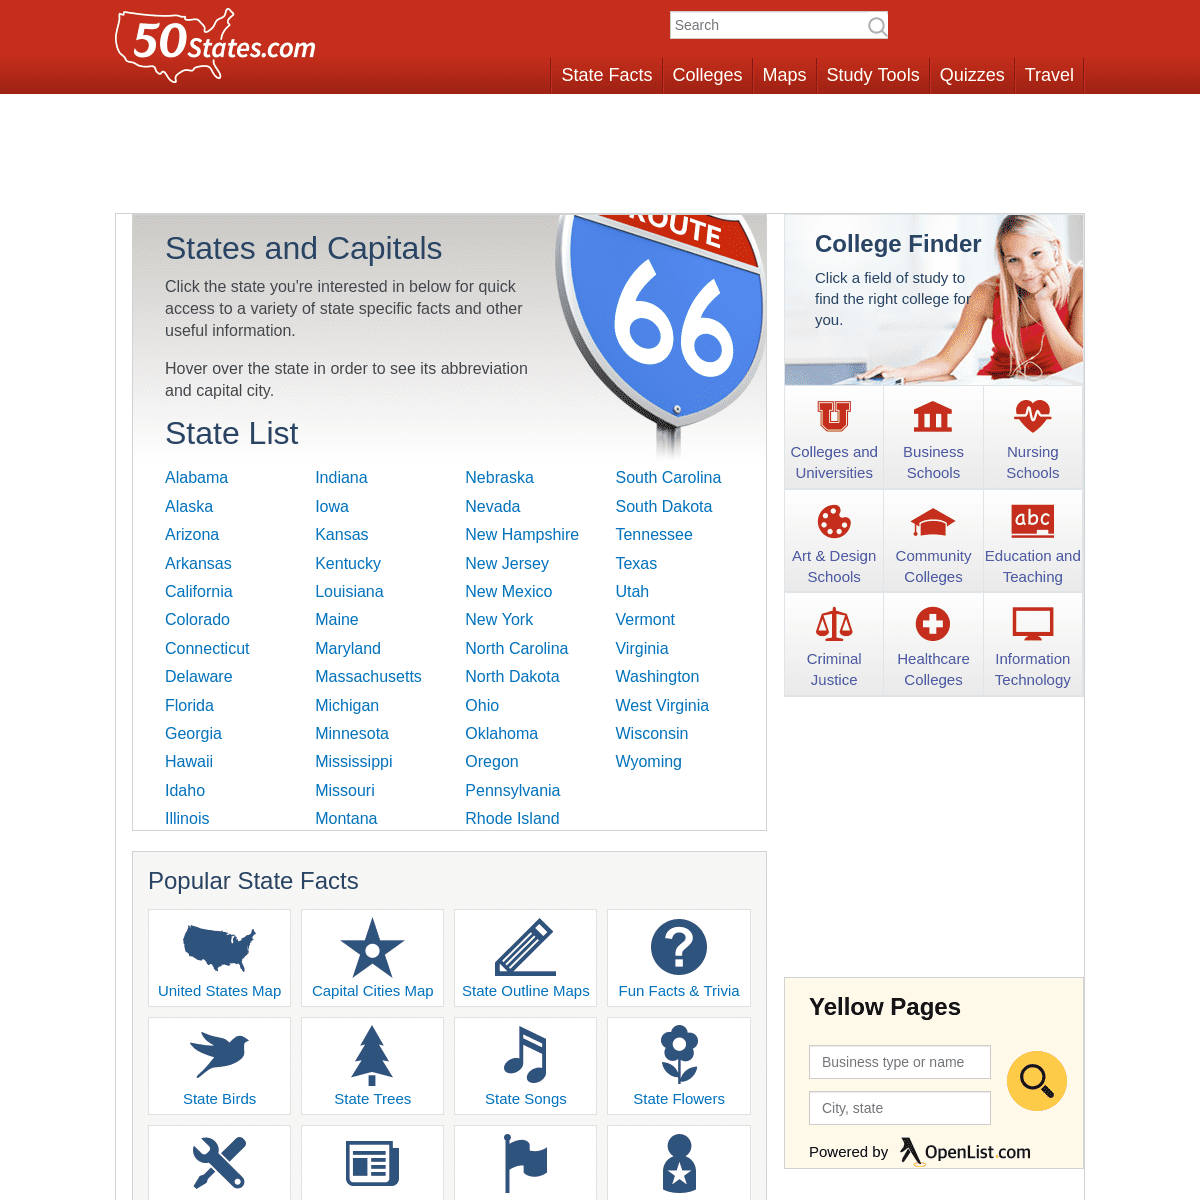 50states.com - States and Capitals